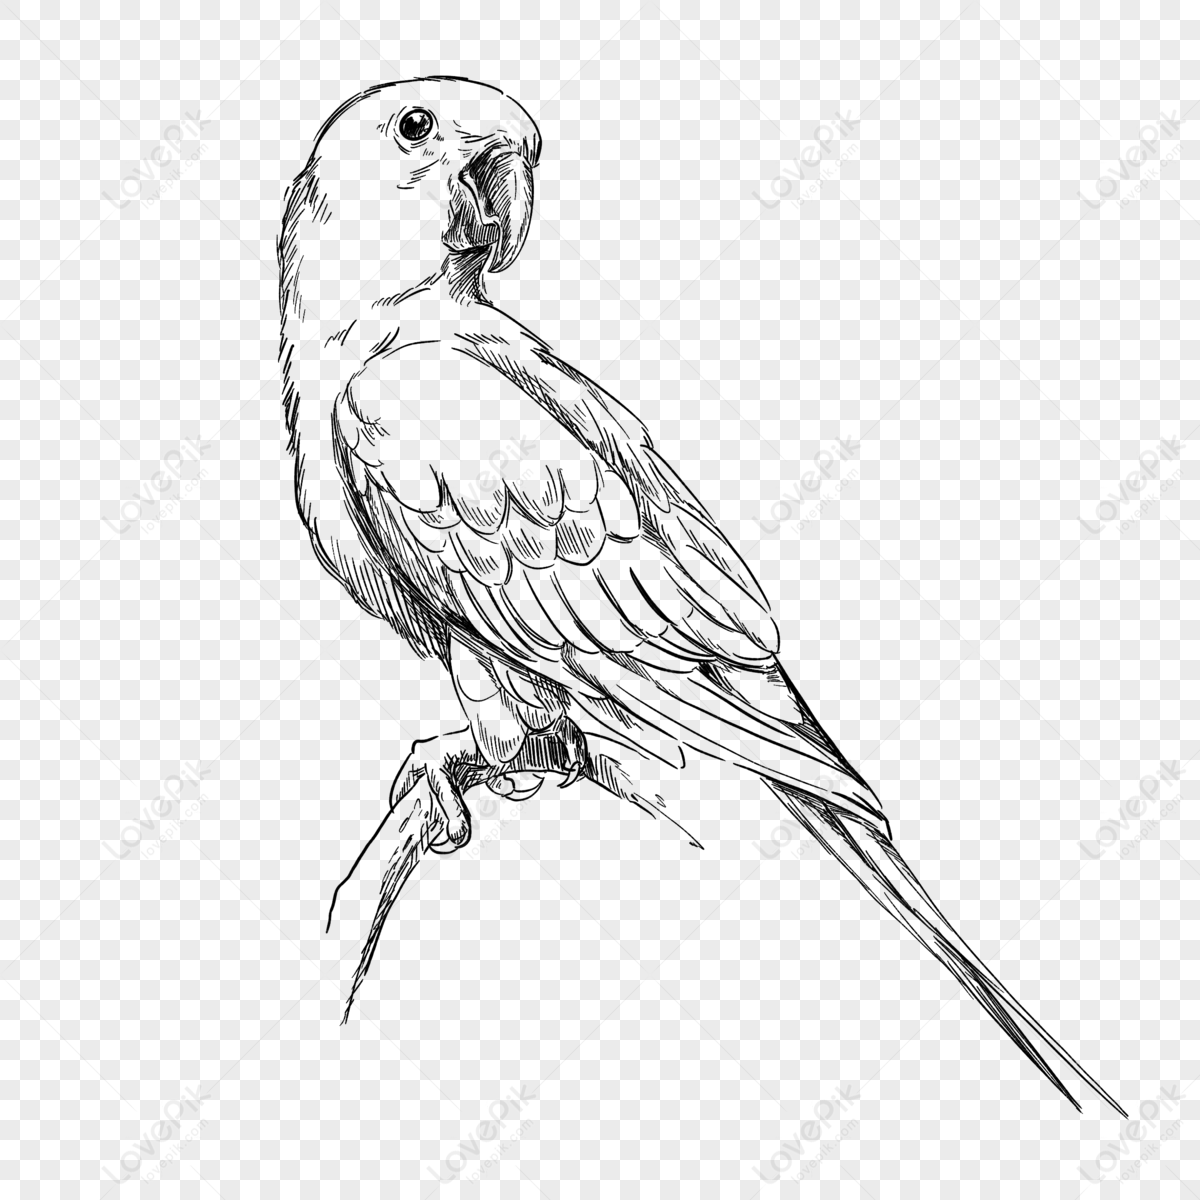 How to Draw a Parrot - Easy Drawing Tutorial For Kids